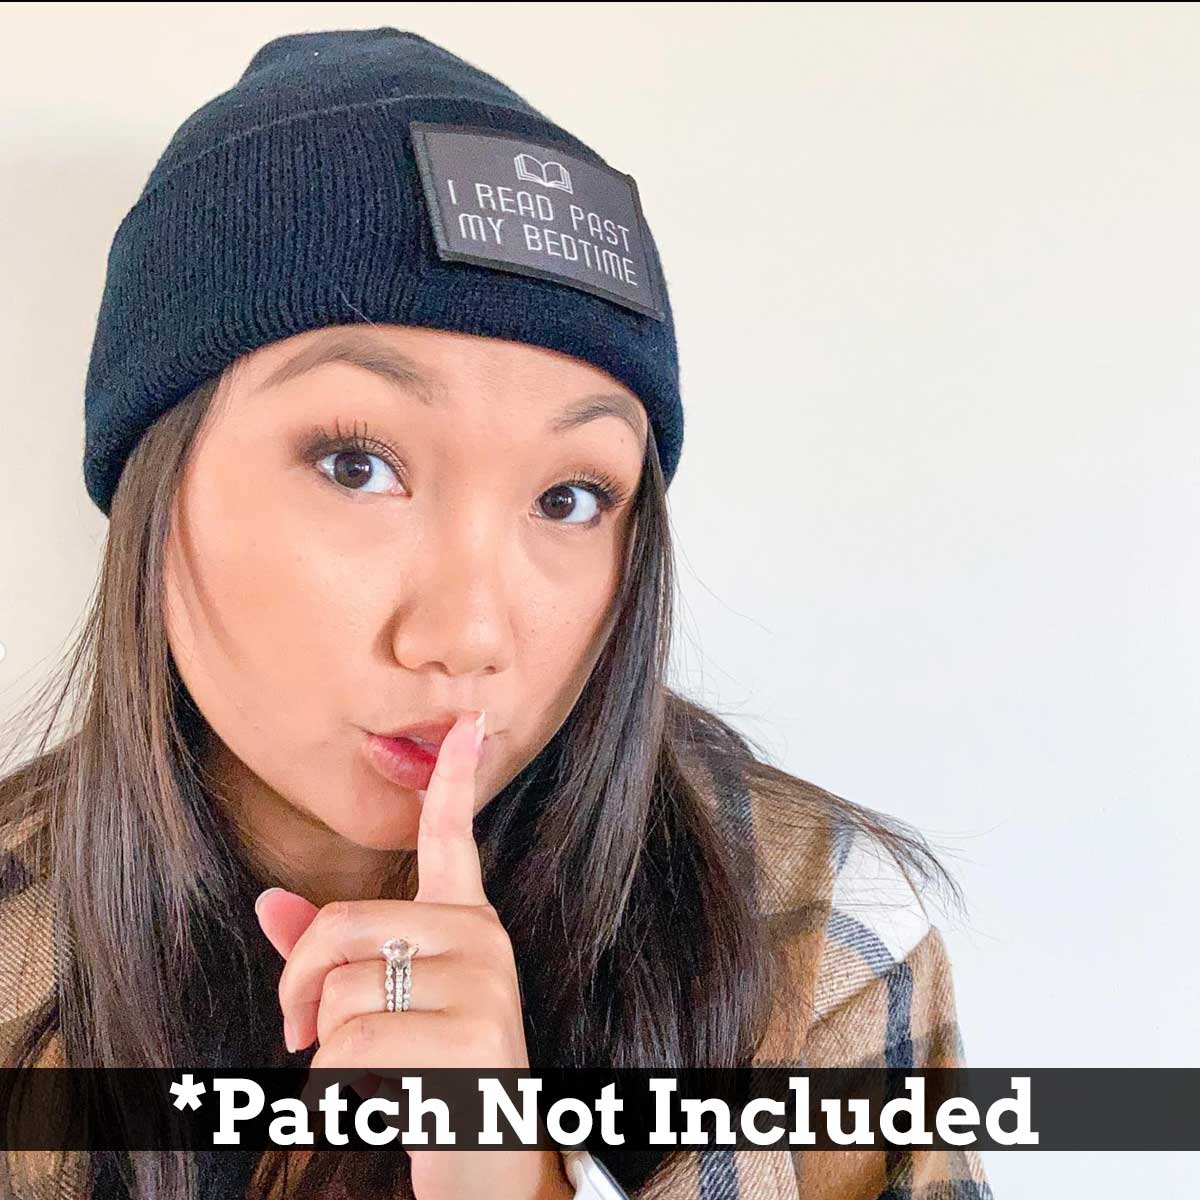 Beanie Pull Patch Cap By Flexfit - Black - Pull Patch - Removable Patches That Stick To Your Gear